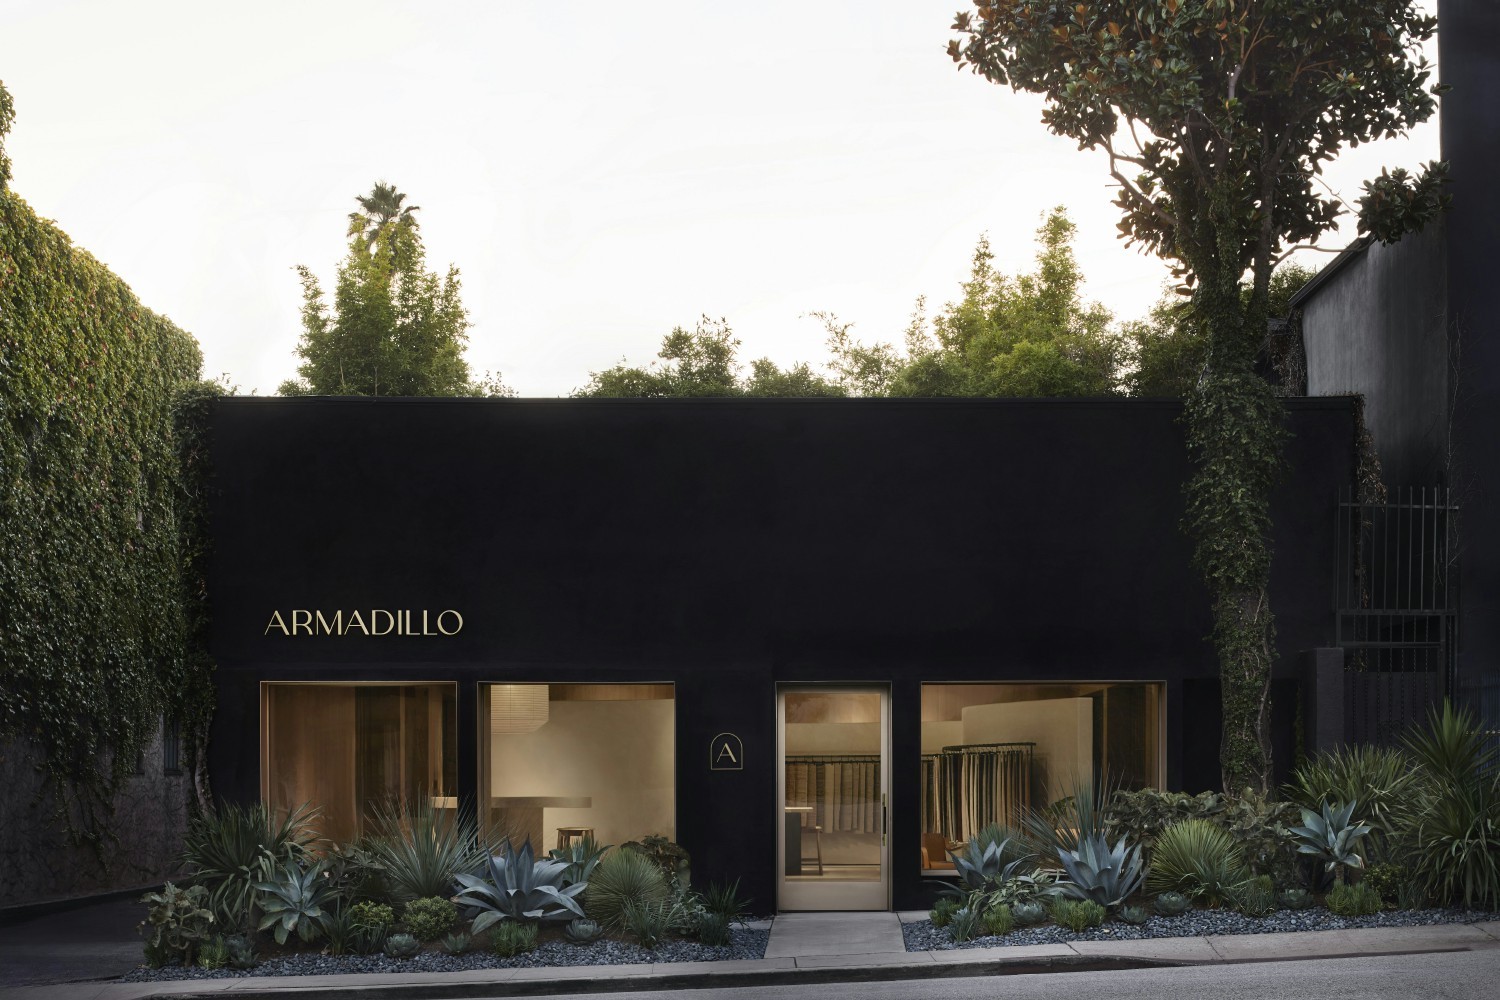 Armadillo’s Los Angeles showroom is its fourth location to run on 100% renewable energy.